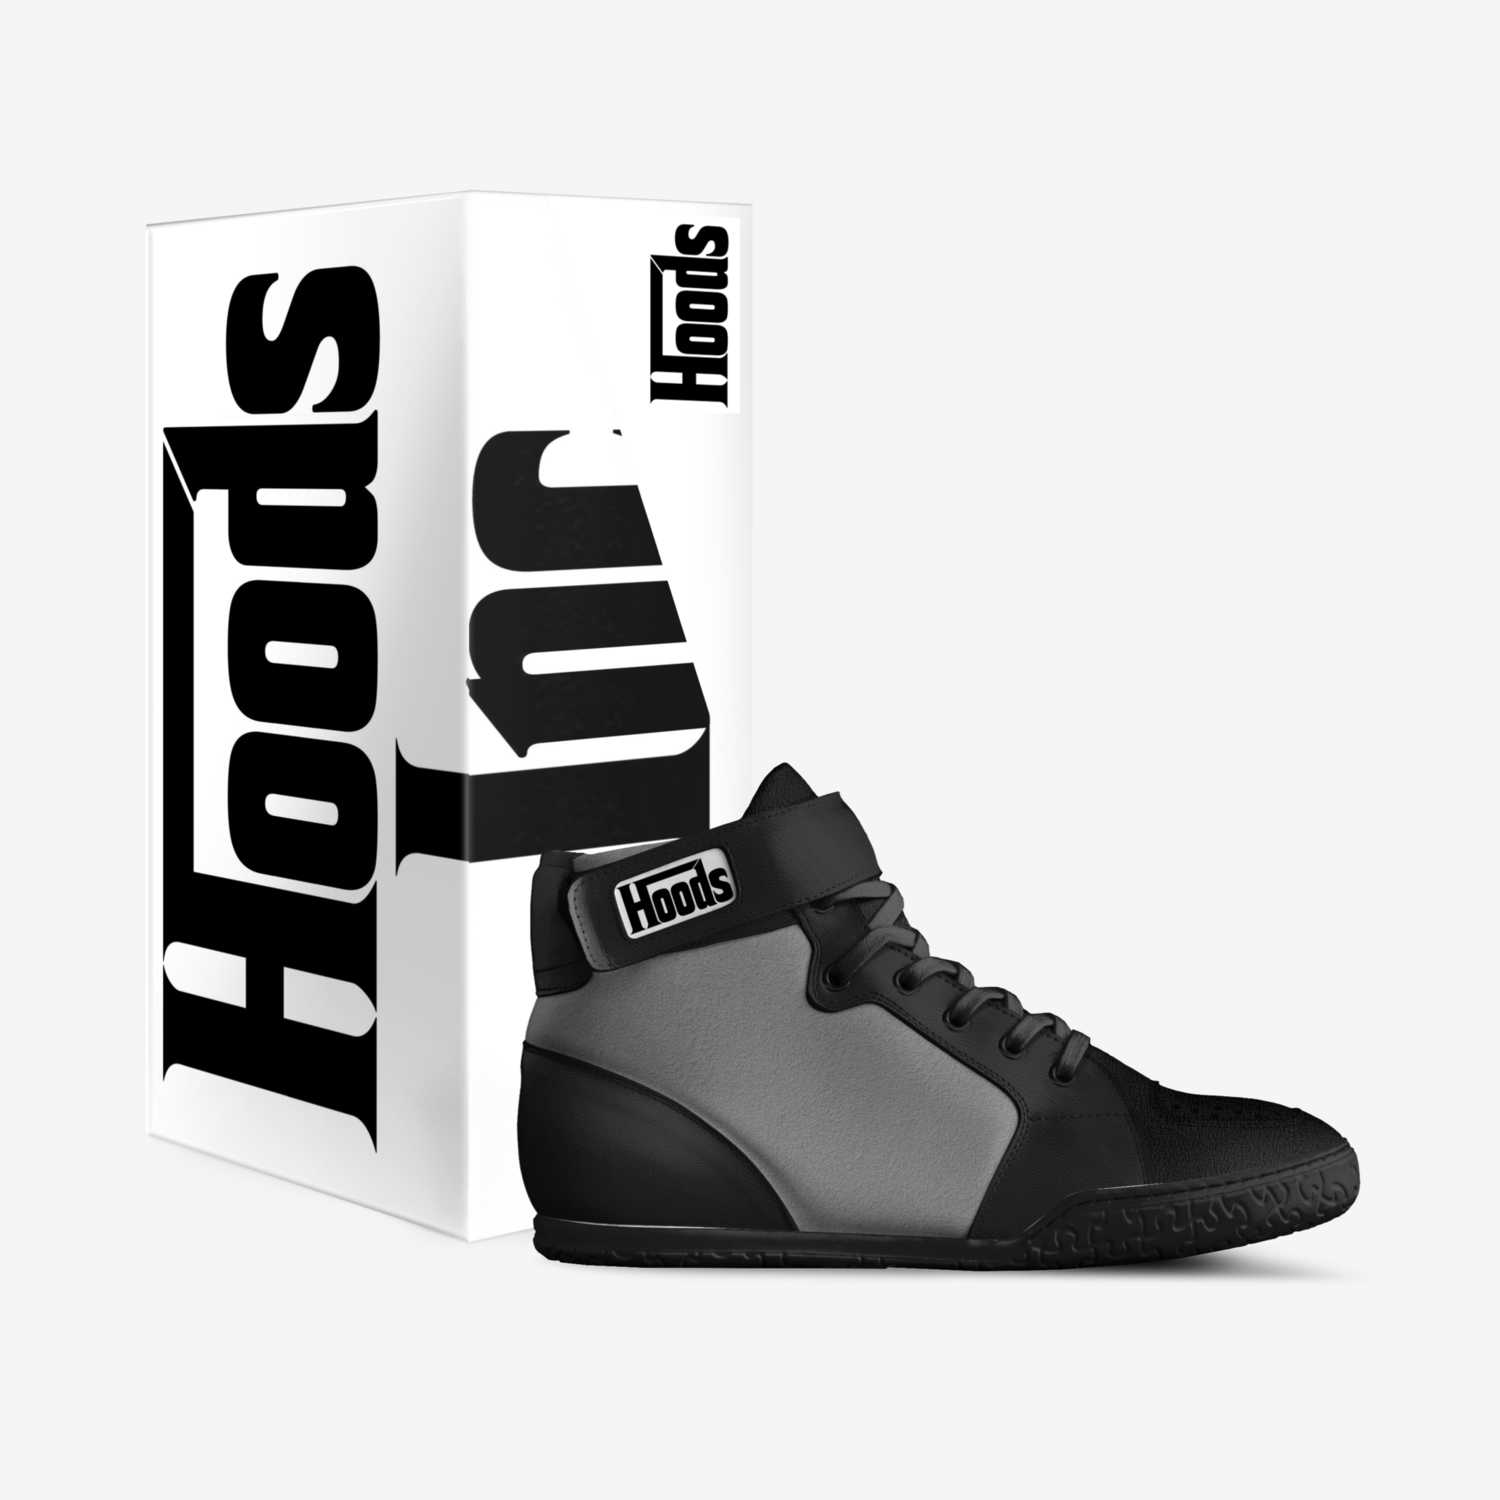 HOODS INC custom made in Italy shoes by Ezeoma Obioha | Box view